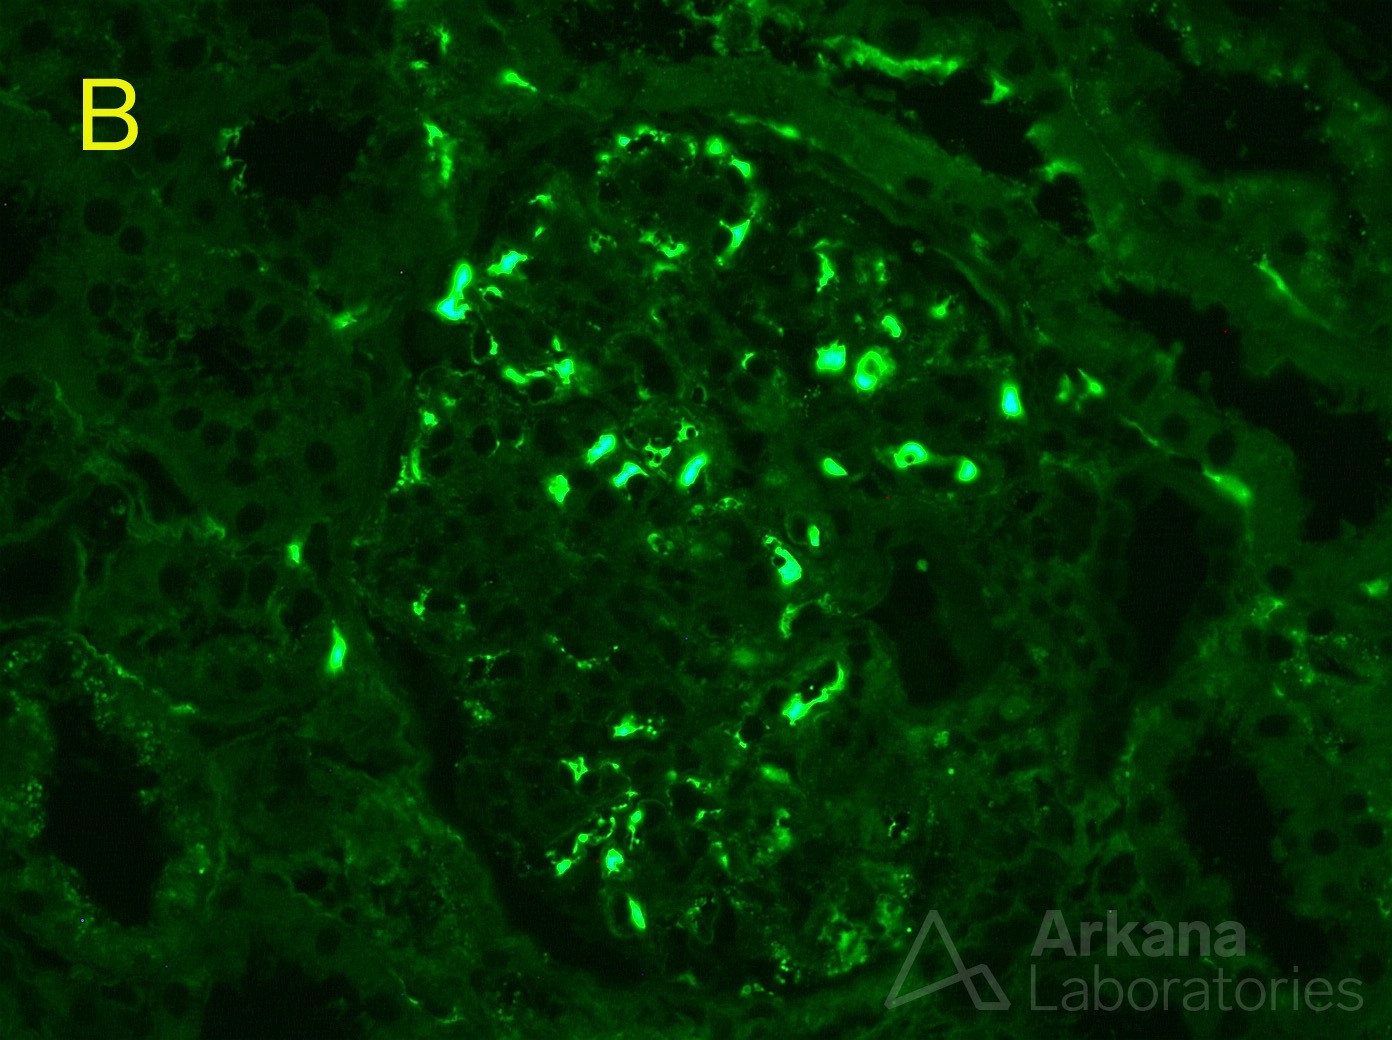 IgA staining is strongly positive only within the capillary spaces of a glomerulus by paraffin immunofluorescence